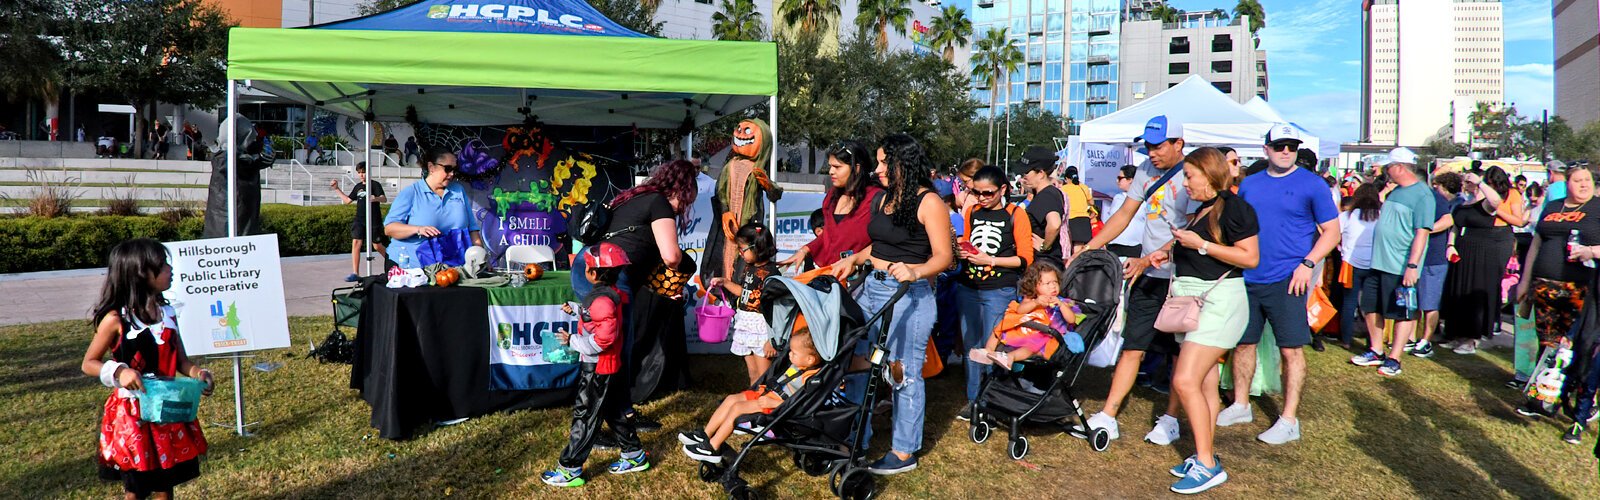 Long lines of families with children slowly inch along to get candy treats from the Hillsborough County Public Library Cooperative at the Curtis Hixon Waterfront Park in downtown Tampa.